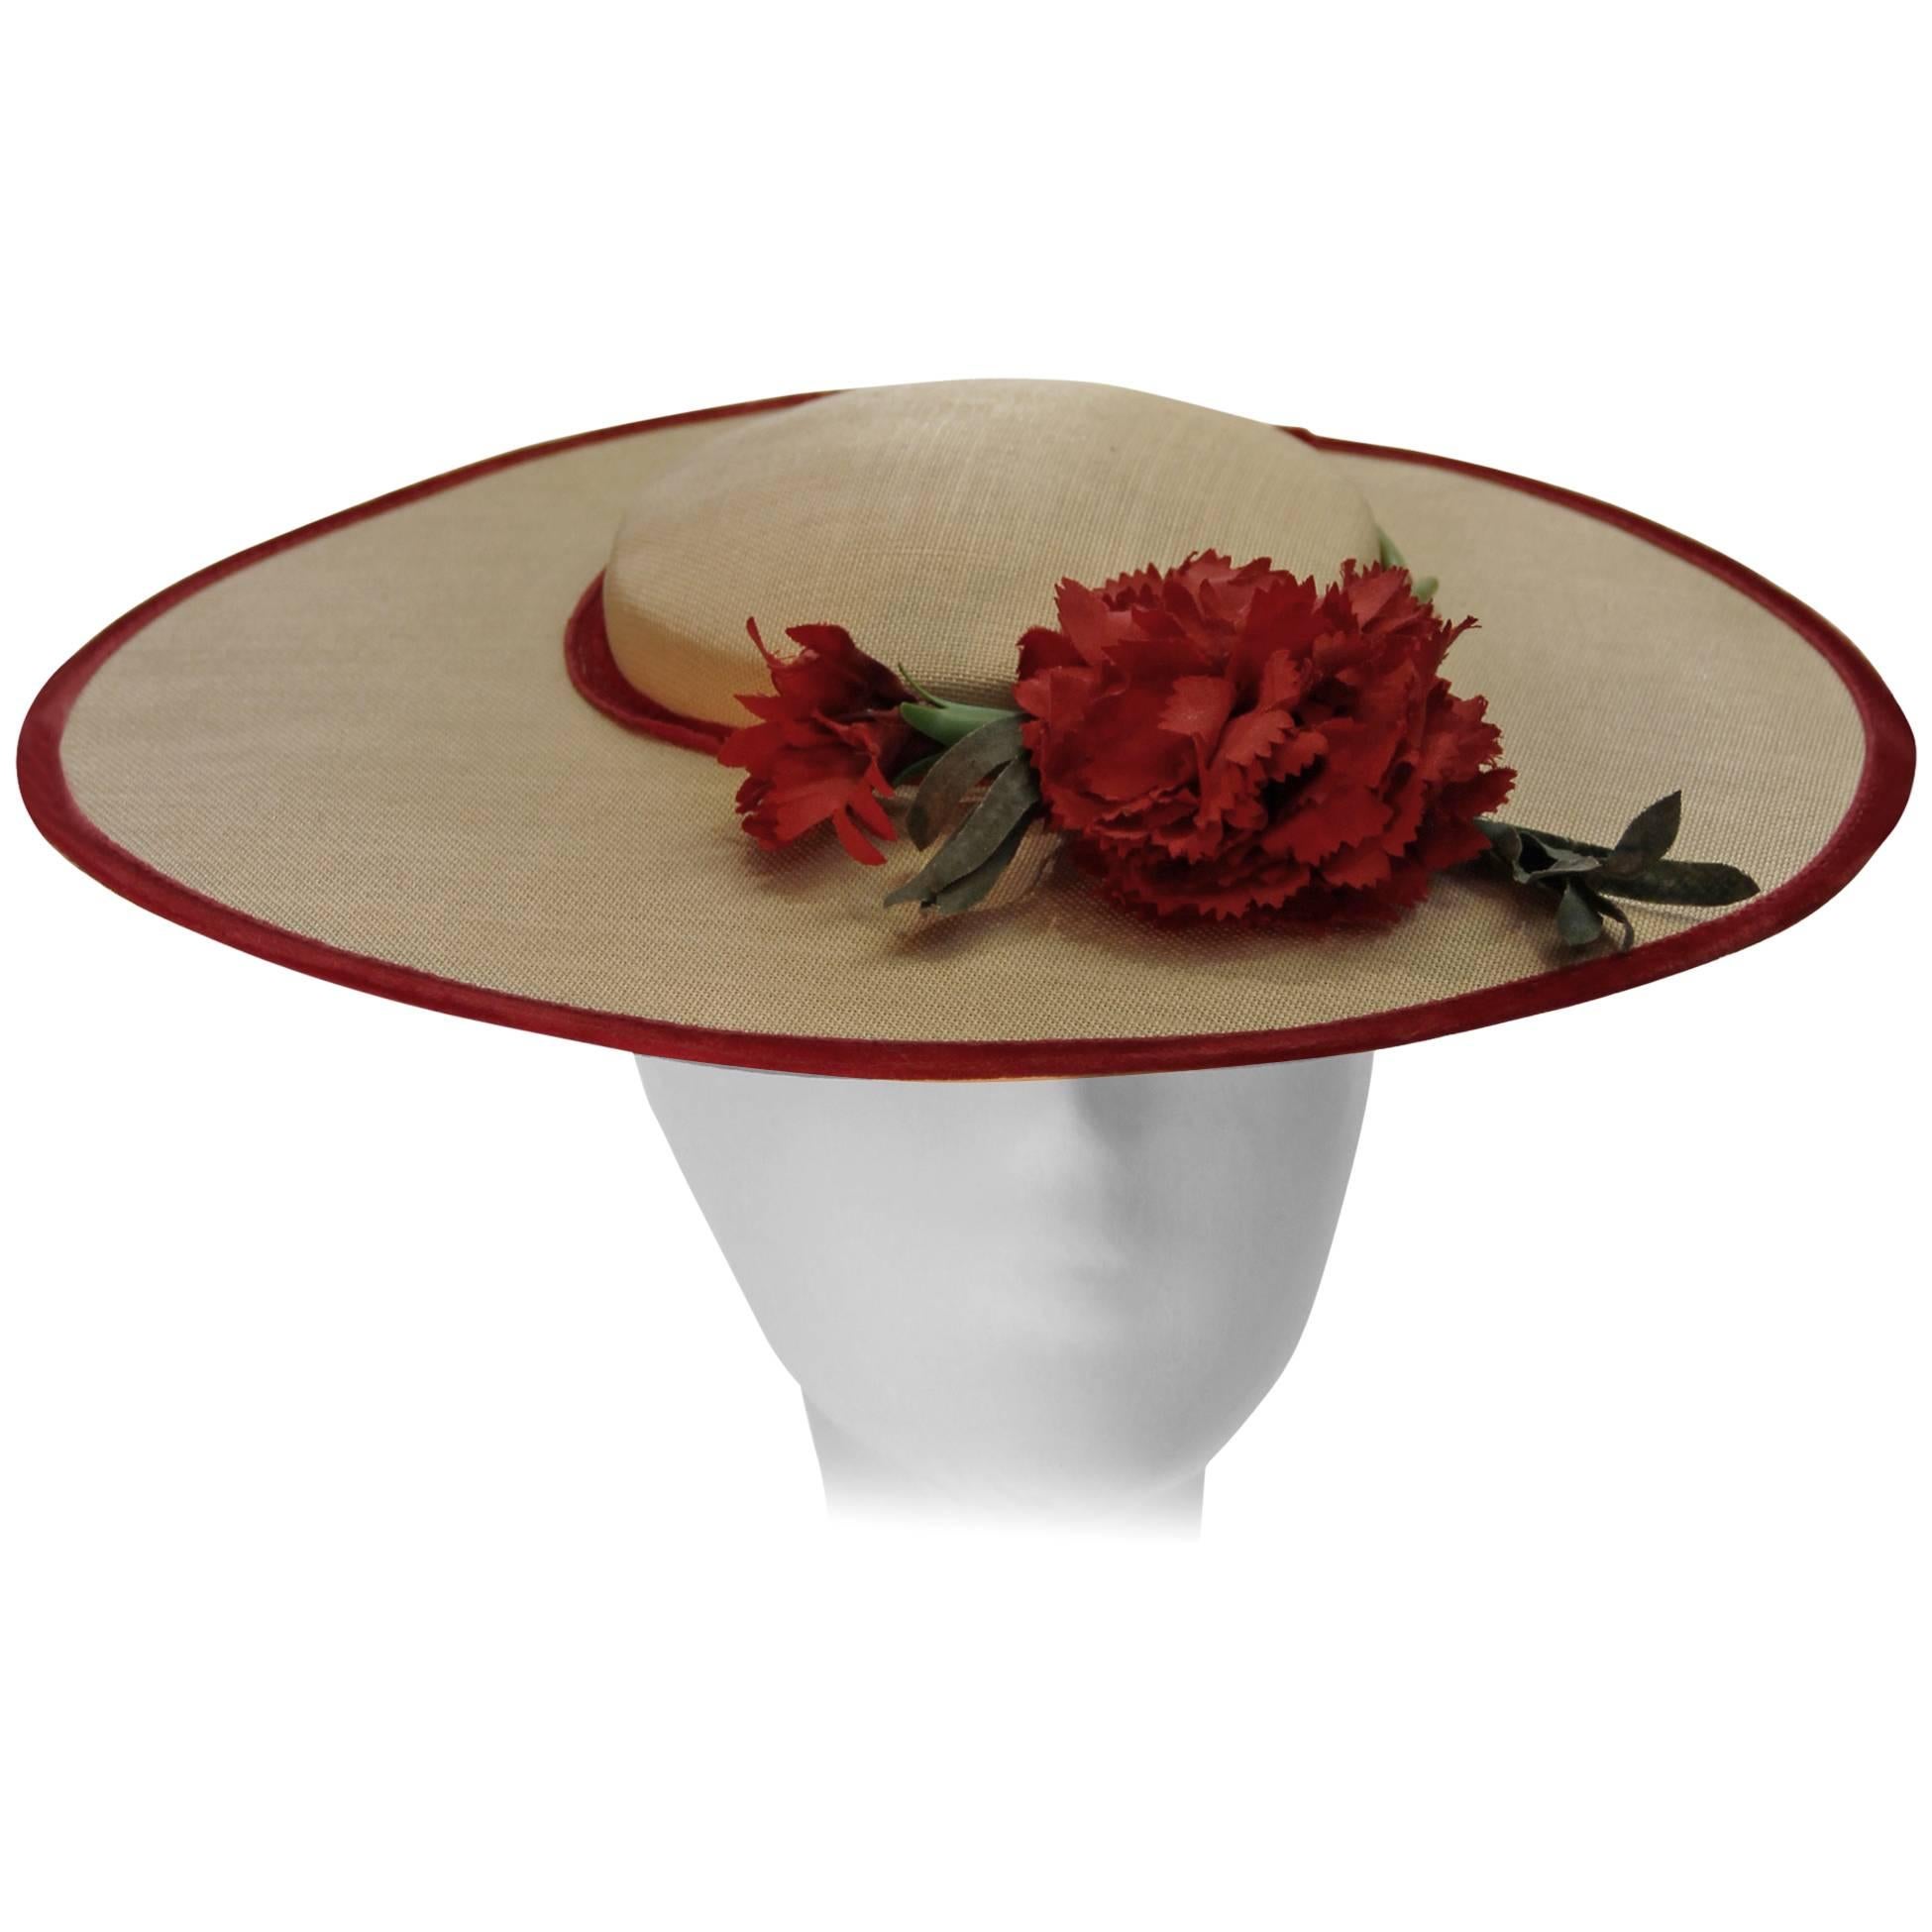 1950s Vintage Wide Brimmed Straw Woven Sun Hat with Red Velvet trim and Flowers